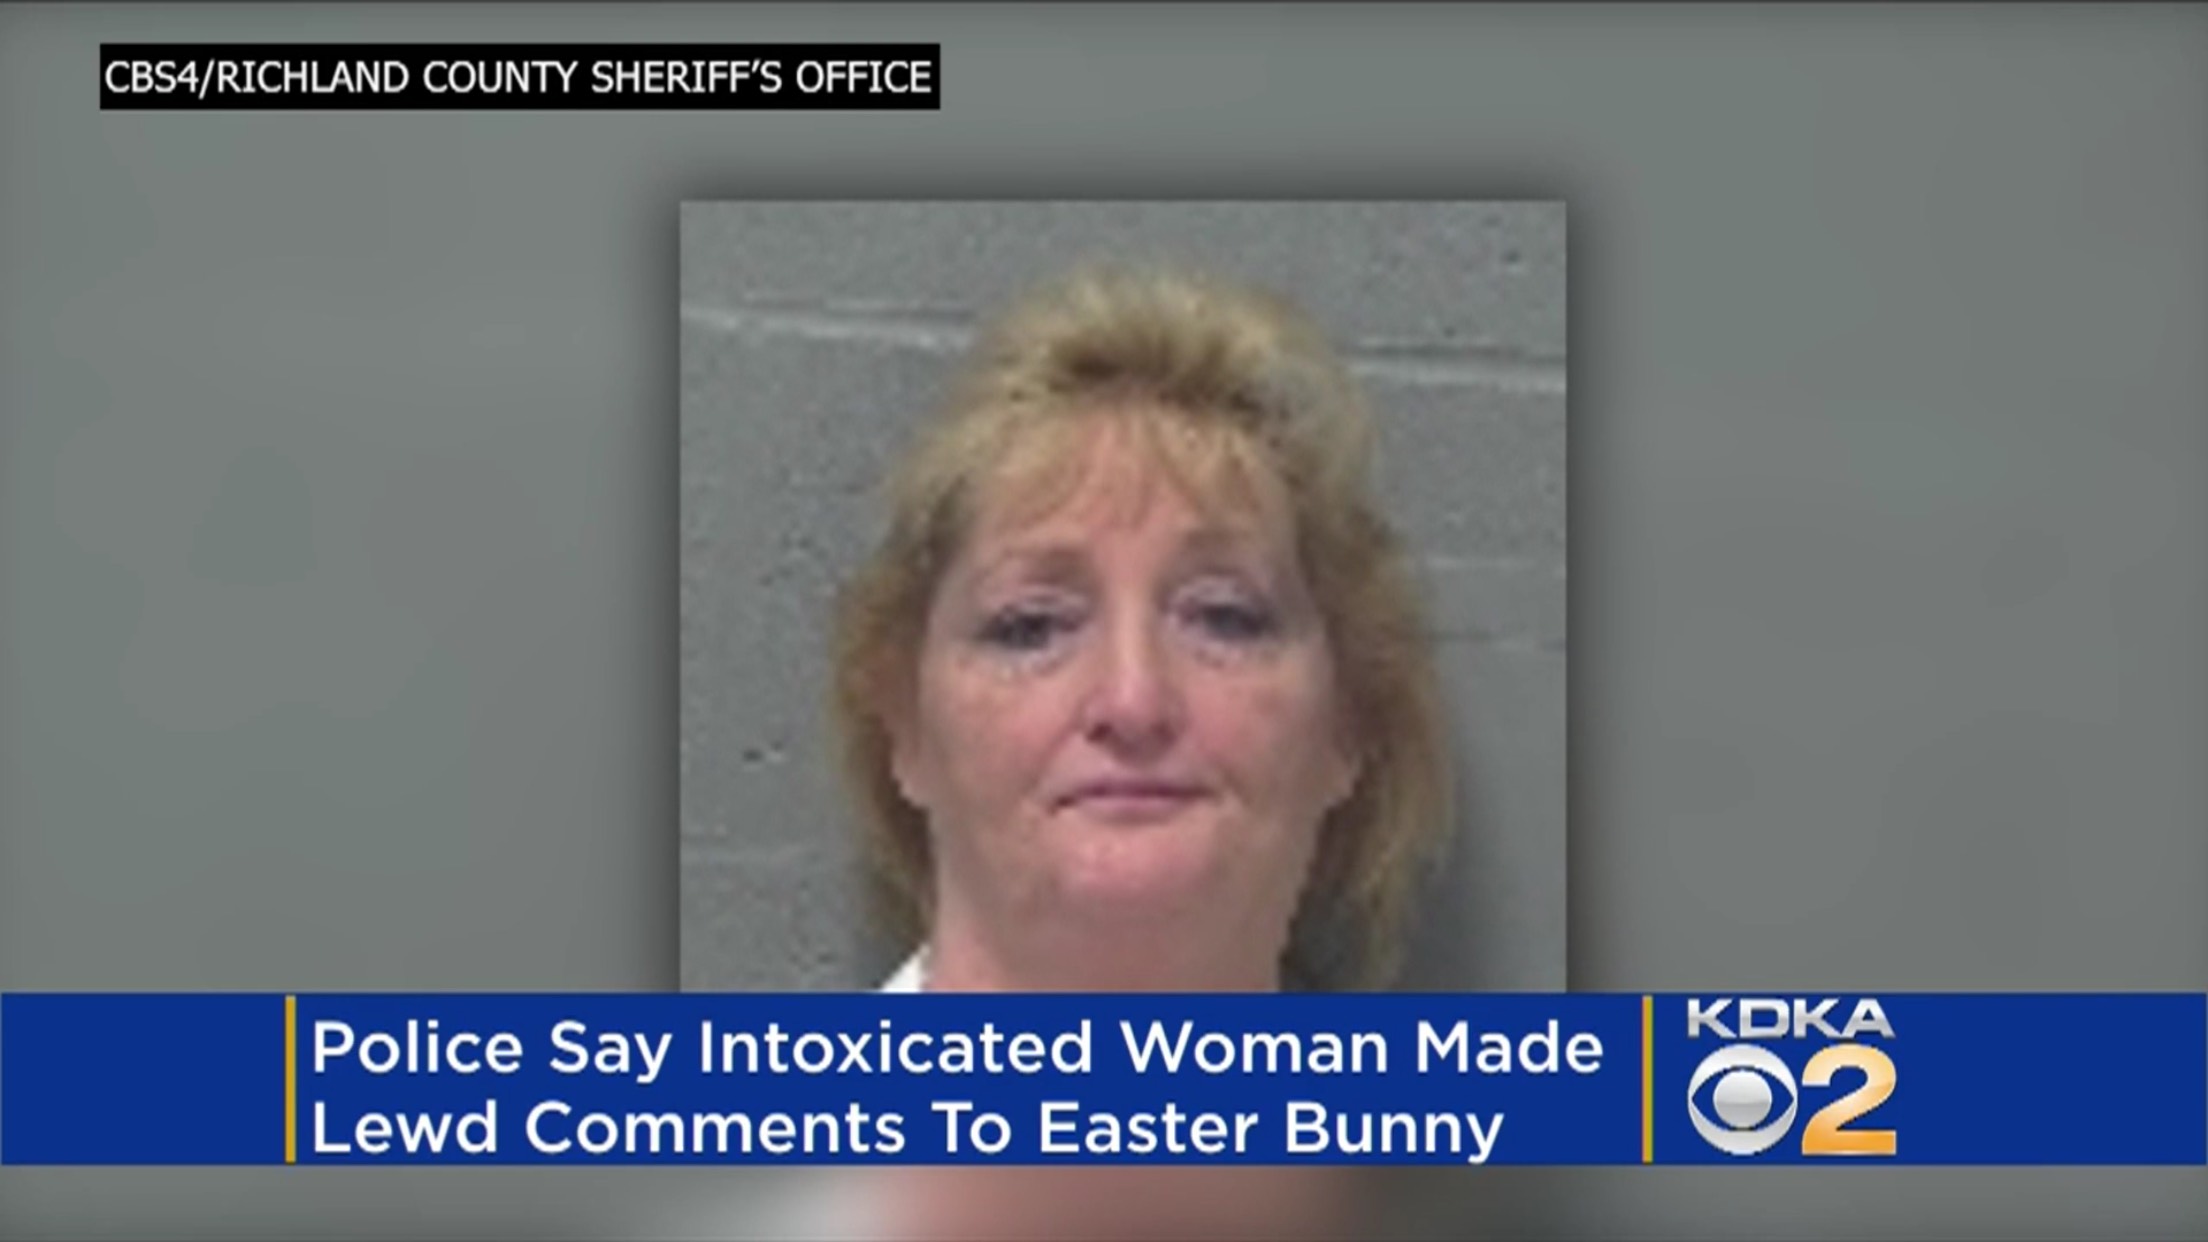 Police Say Intoxicated Woman Made Lewd Comments To Easter Bunny